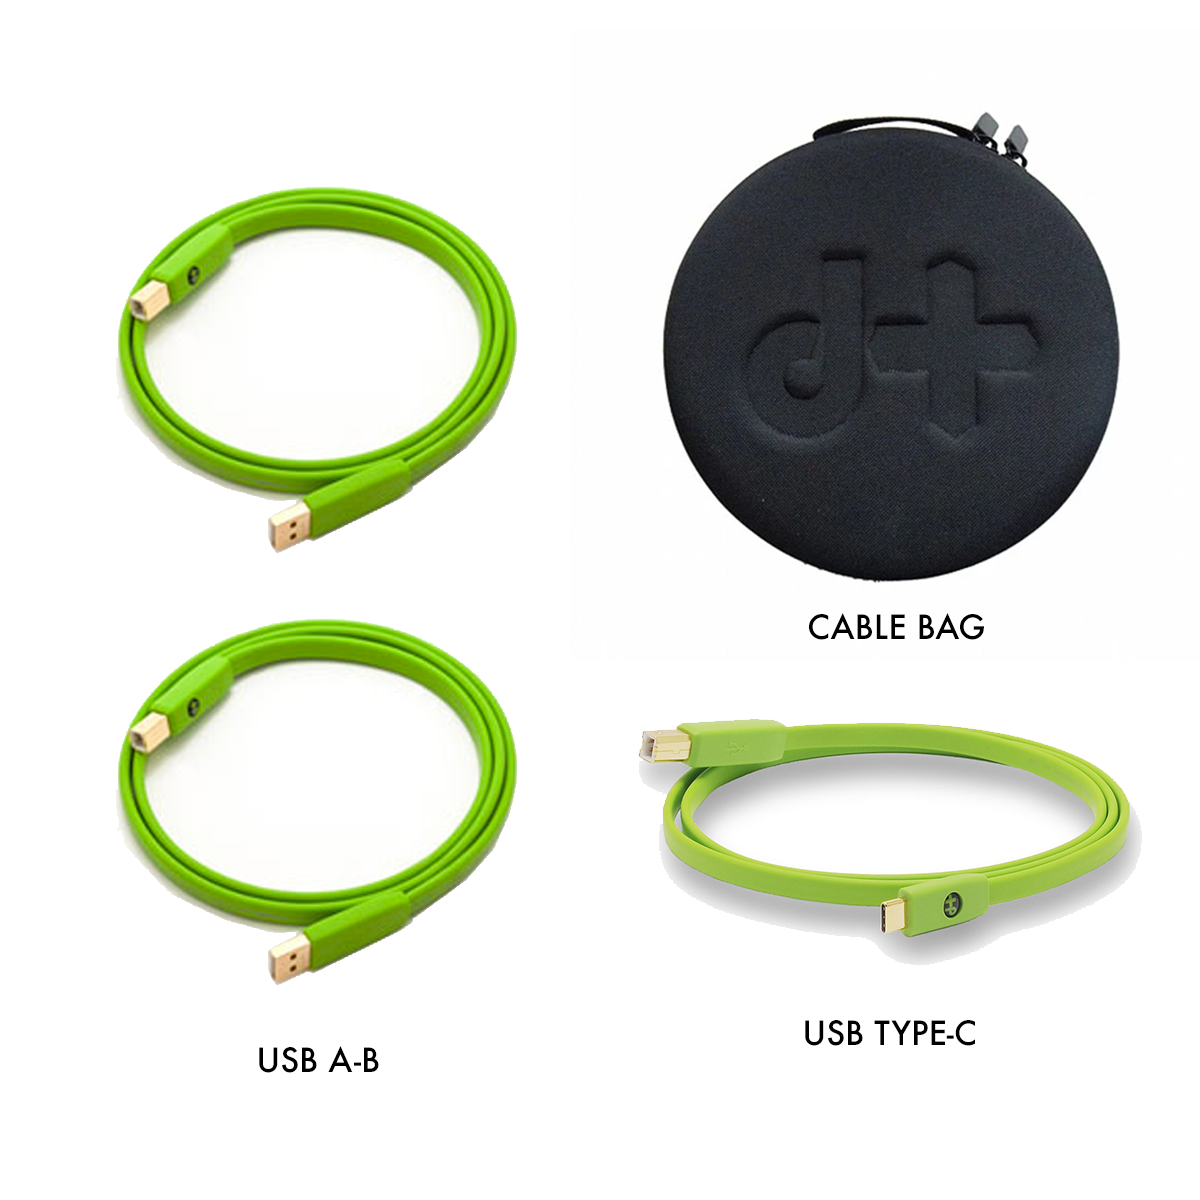 Oyaide NEO d+ Class B DJ Cable Set (1 USB Type-C Cable + 2 USB Class B Cables + Cable Bag)